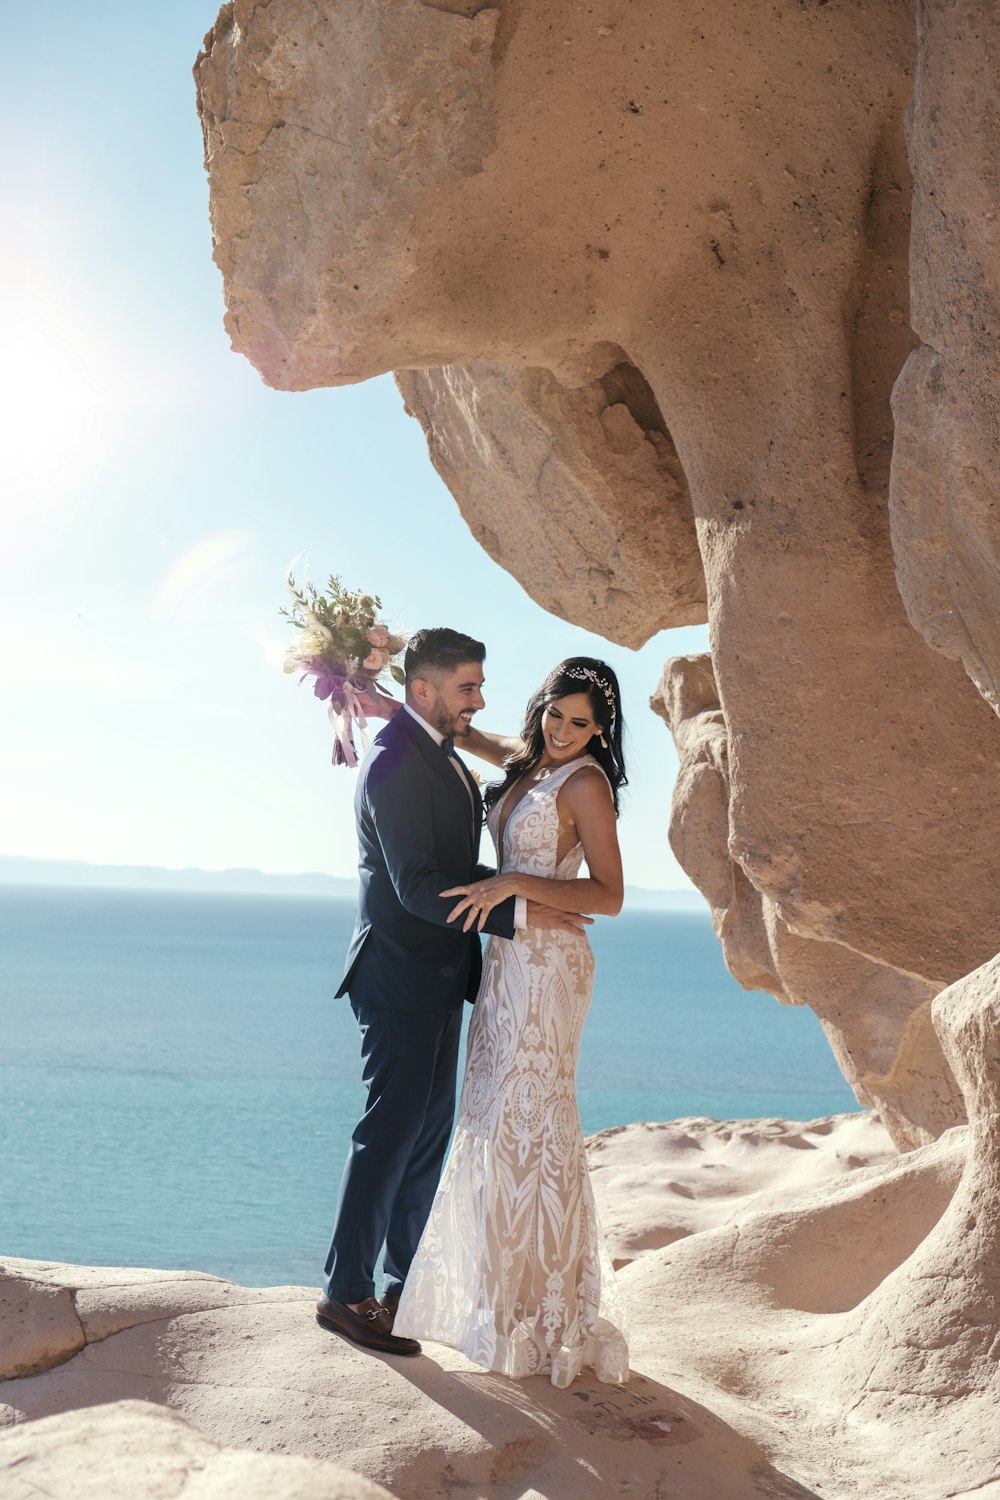 a bride and groom pose for a photo in the desert